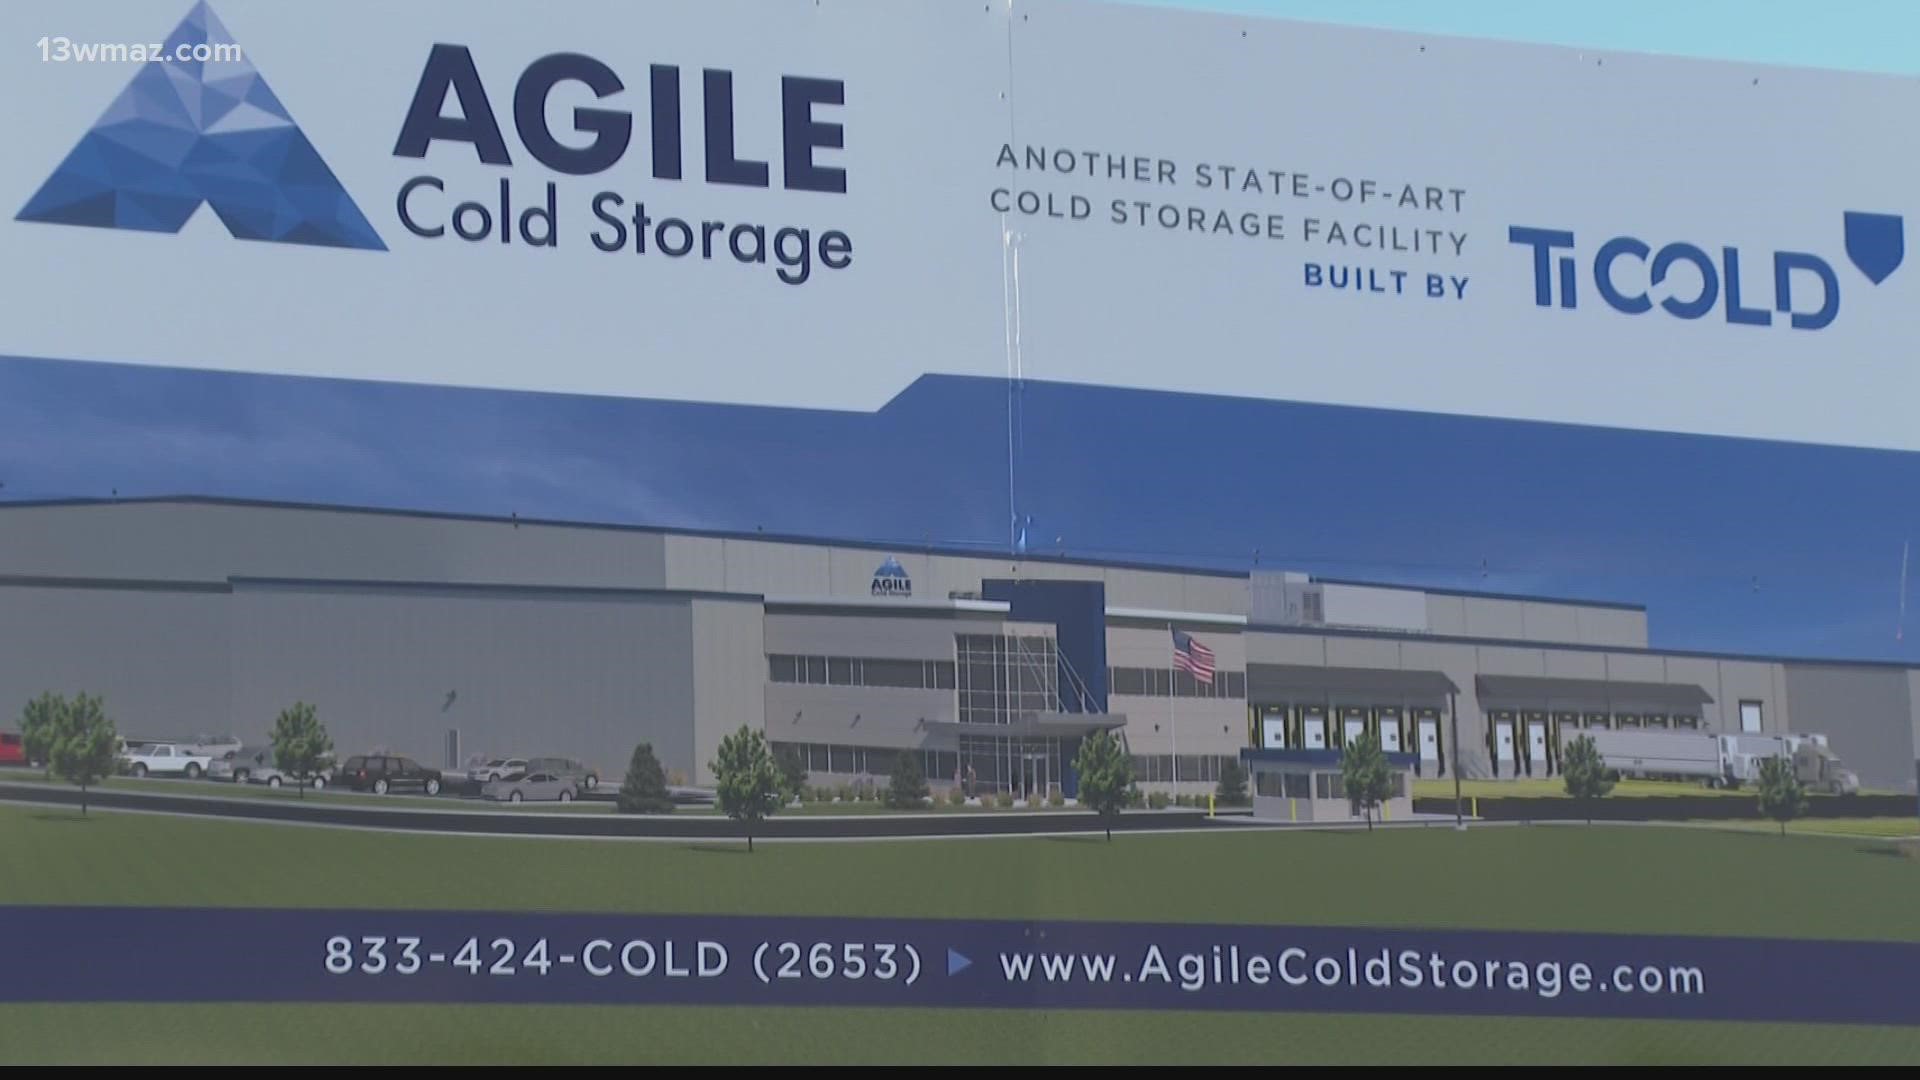 Macon is home to numerous long established industries like YKK and Geico, and joining them soon is Agile Cold Storage.